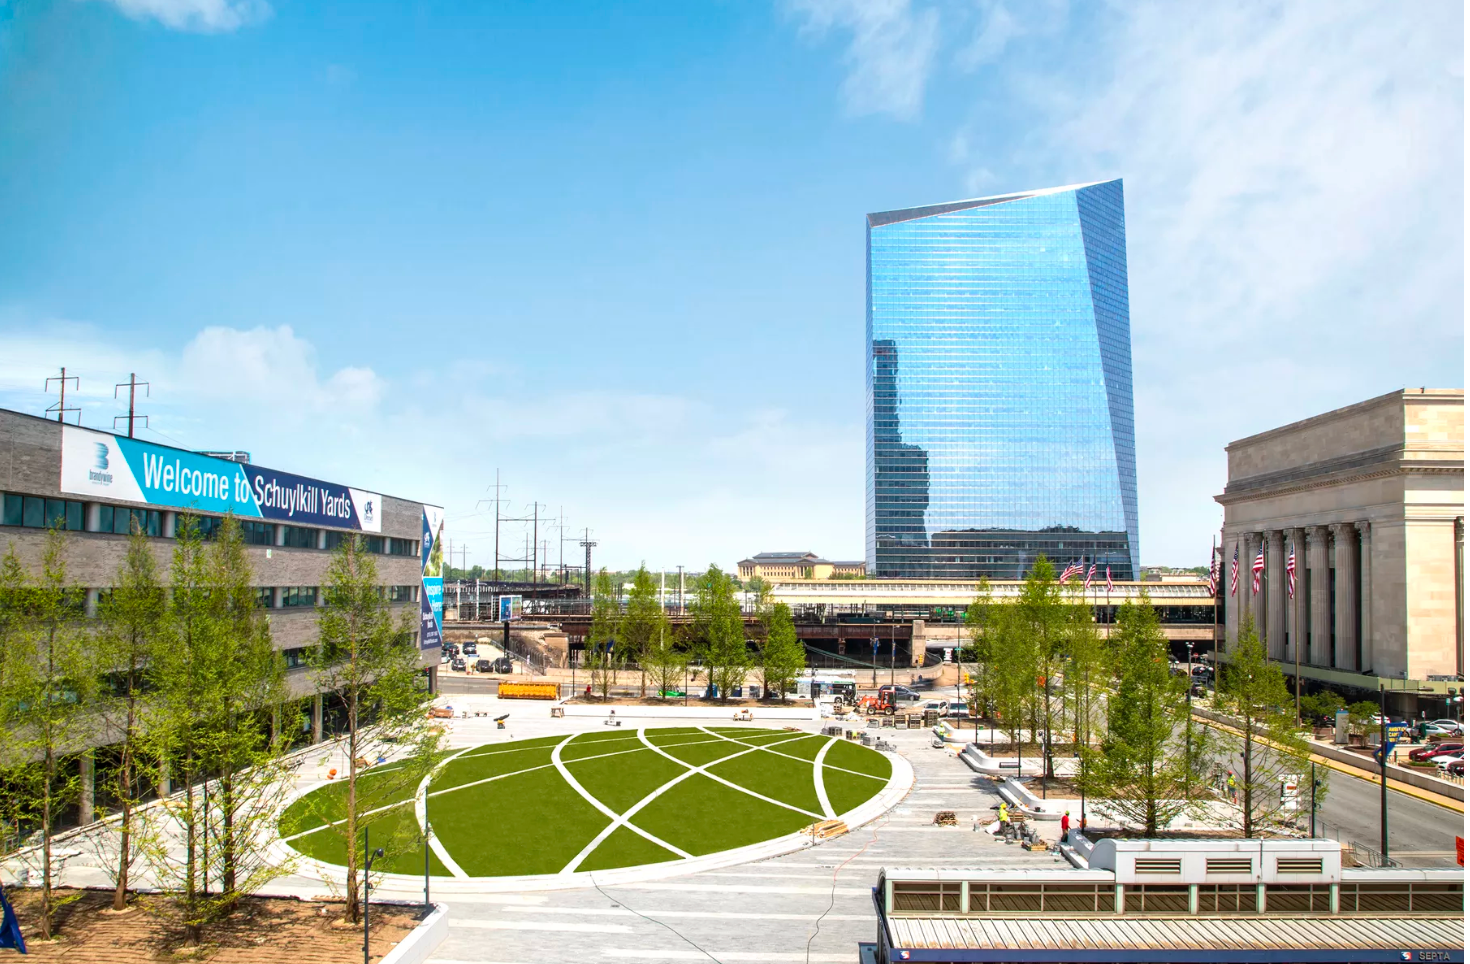 Drexel Square is a circular park bringing 1.3 acres of green space to a former parking lot across from 30th Street Station.